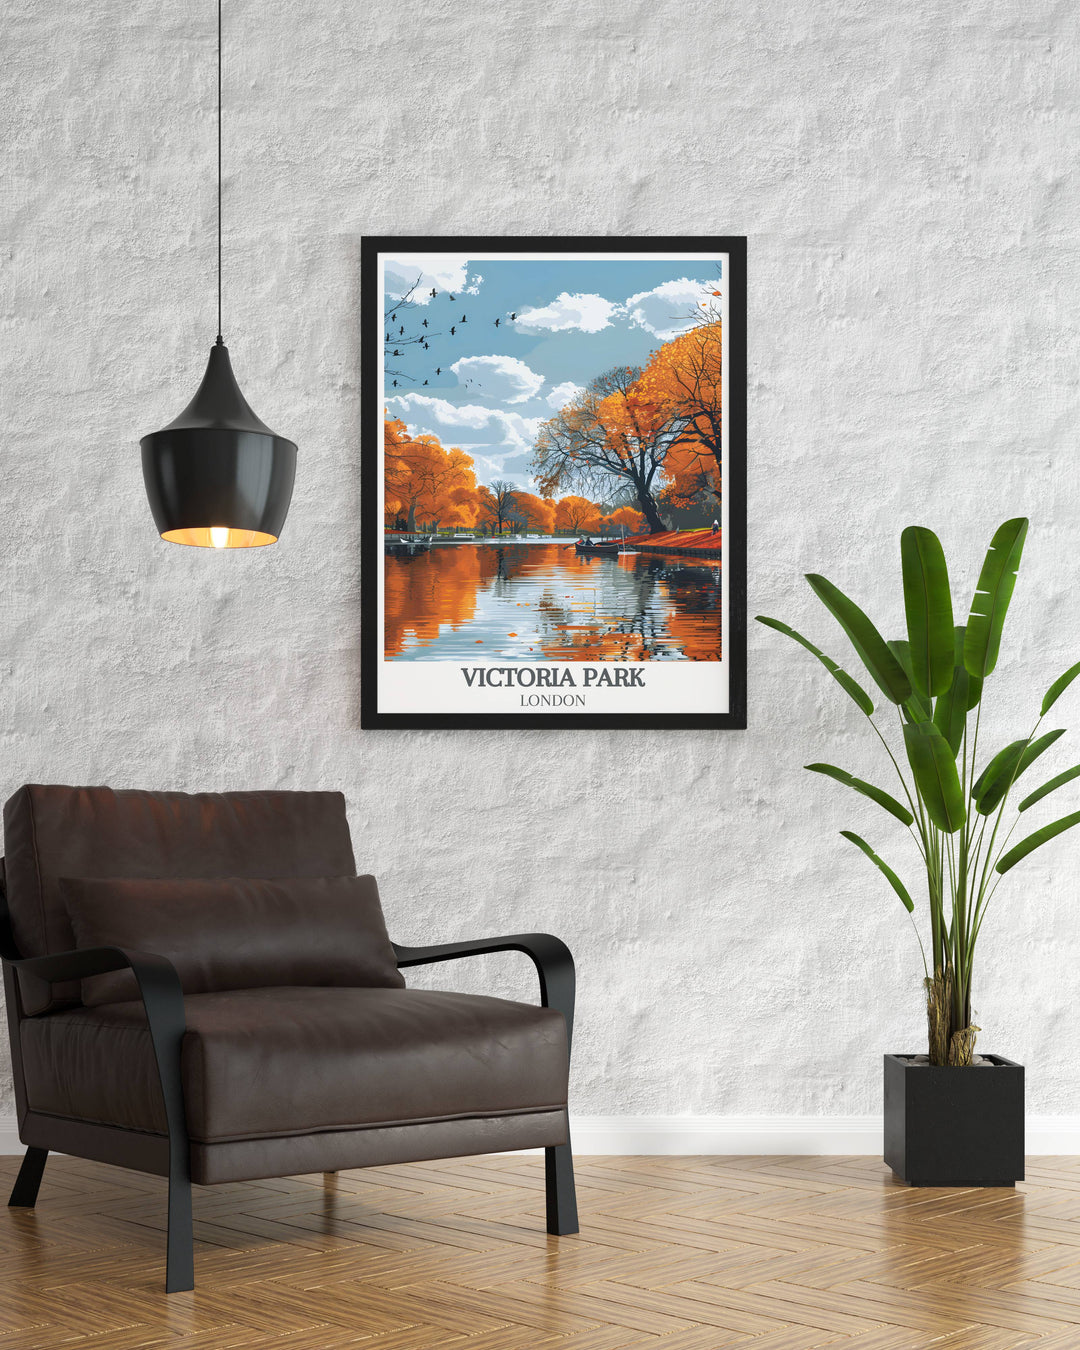 Victoria Park London travel poster featuring picturesque surroundings and tranquil waters ideal for art enthusiasts and travel lovers.